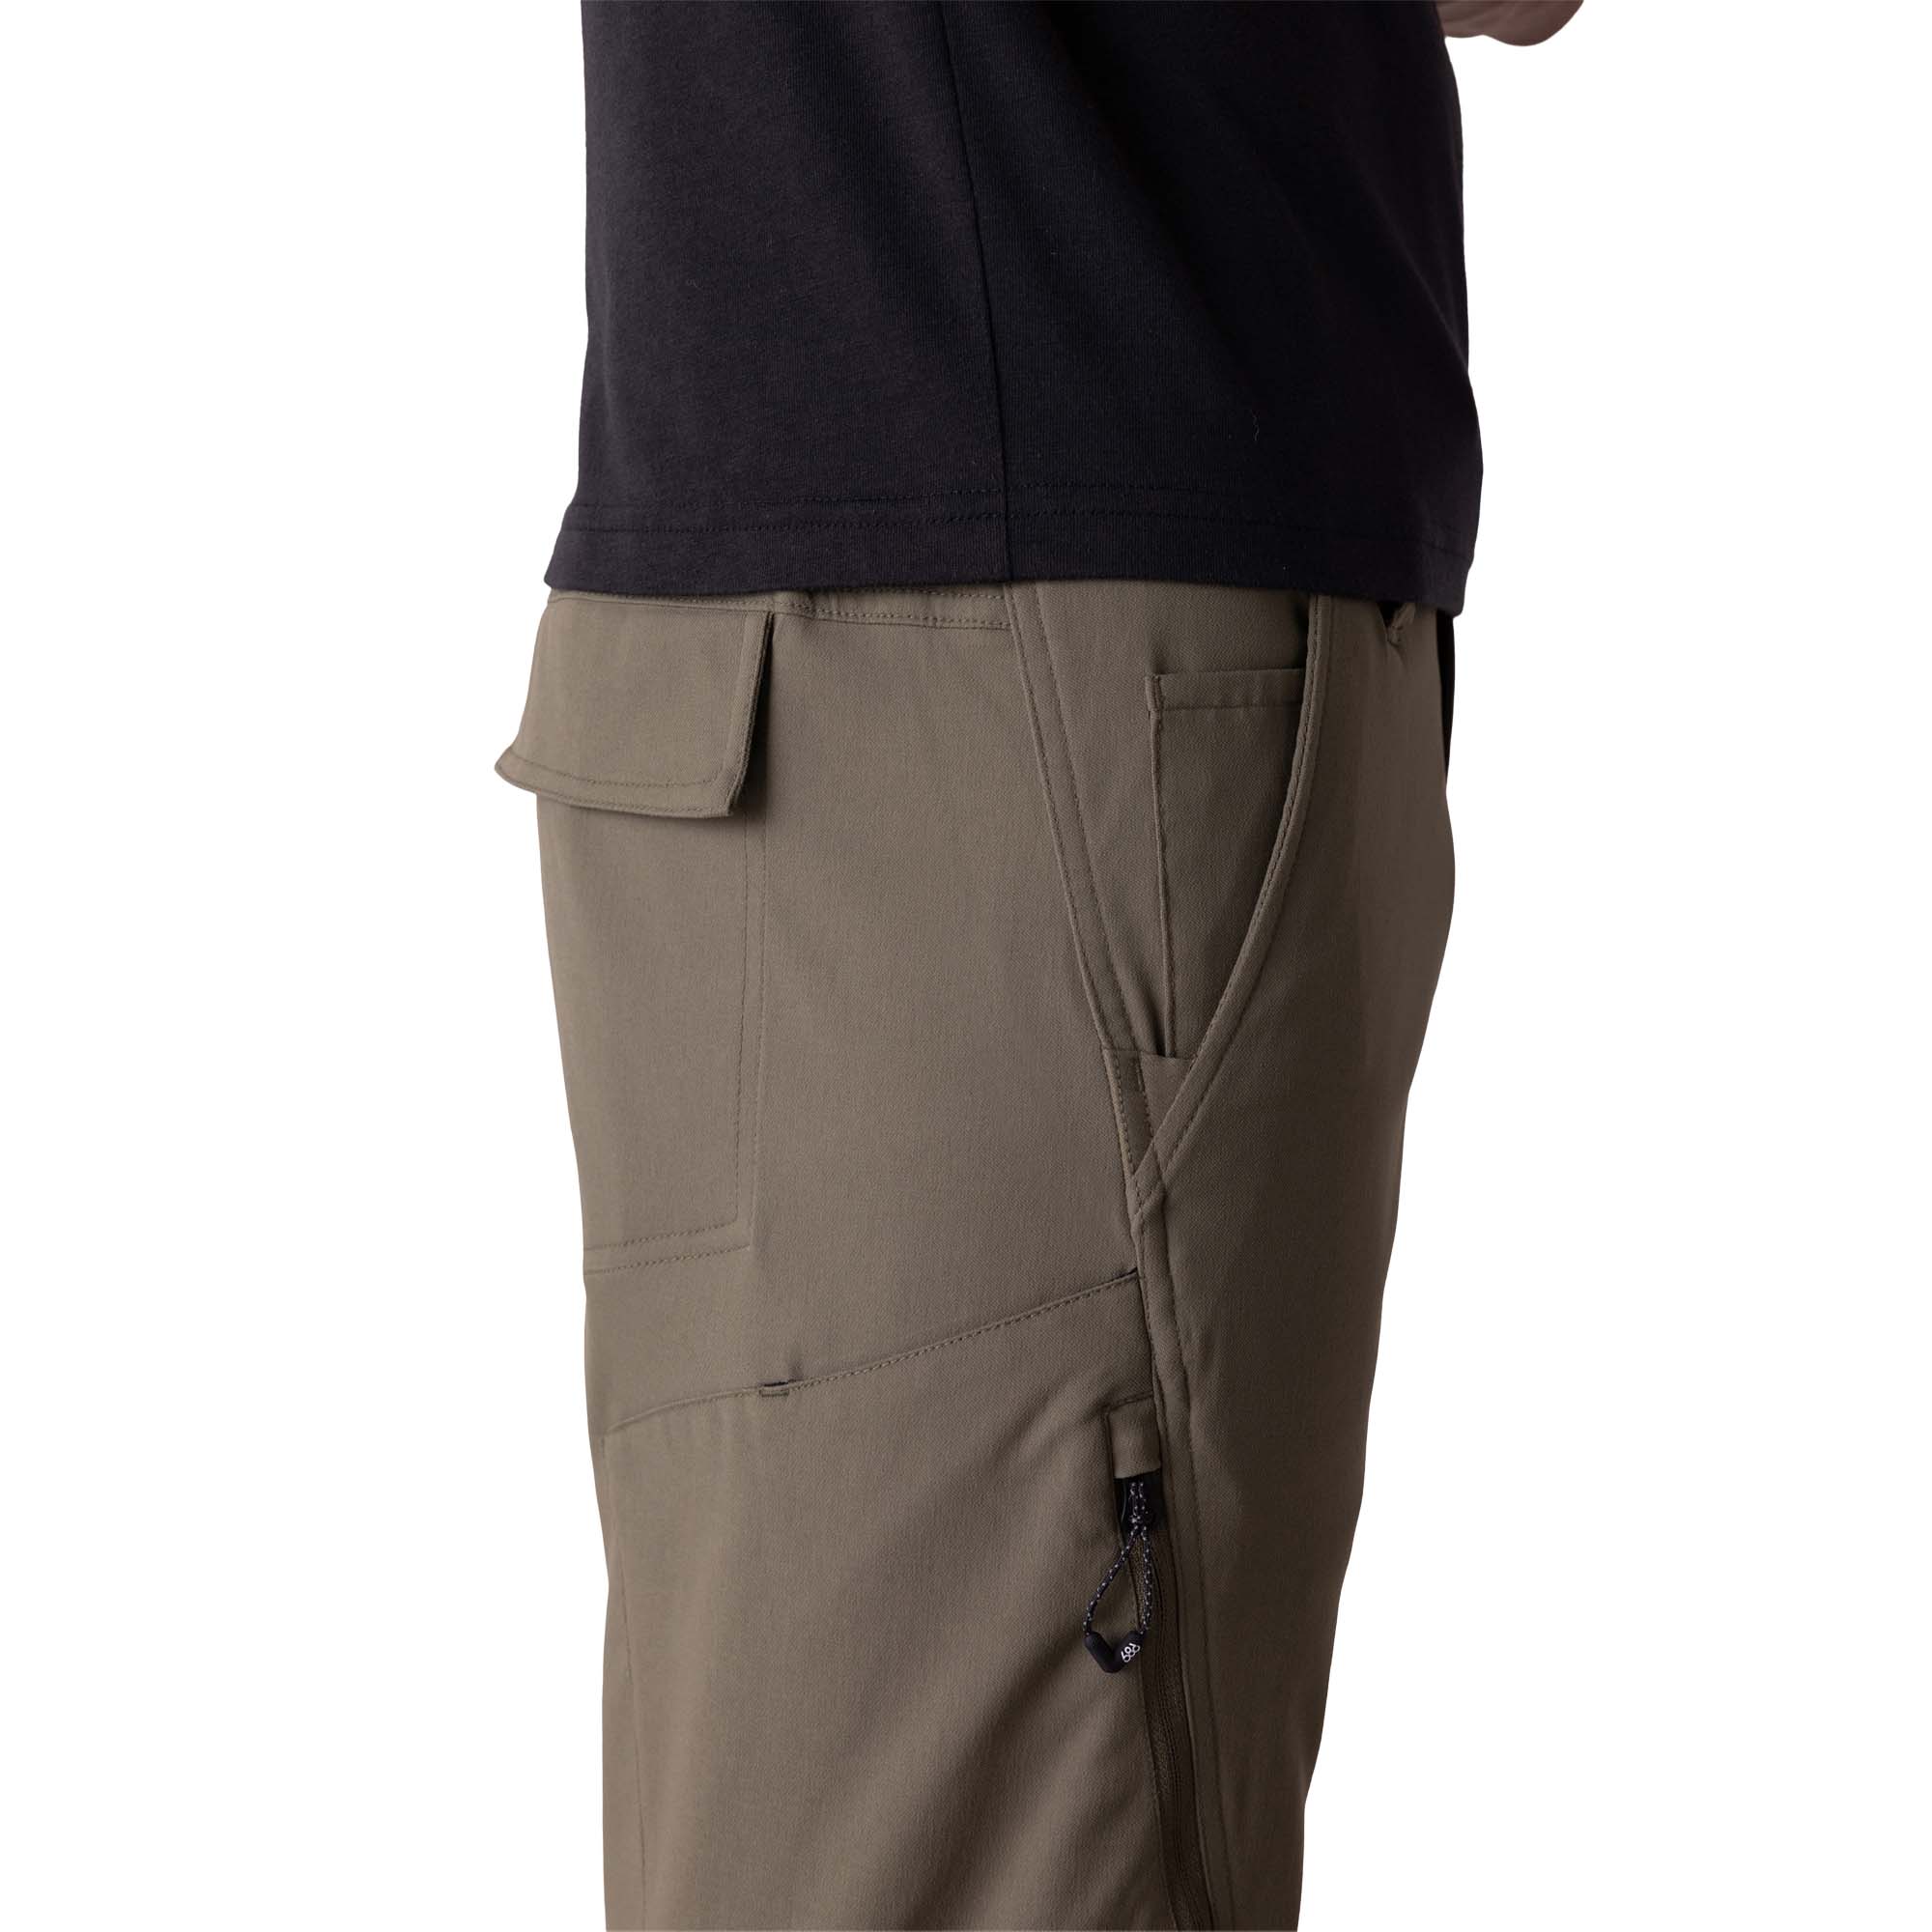 686 Anything Slim Fit Cargo Pants